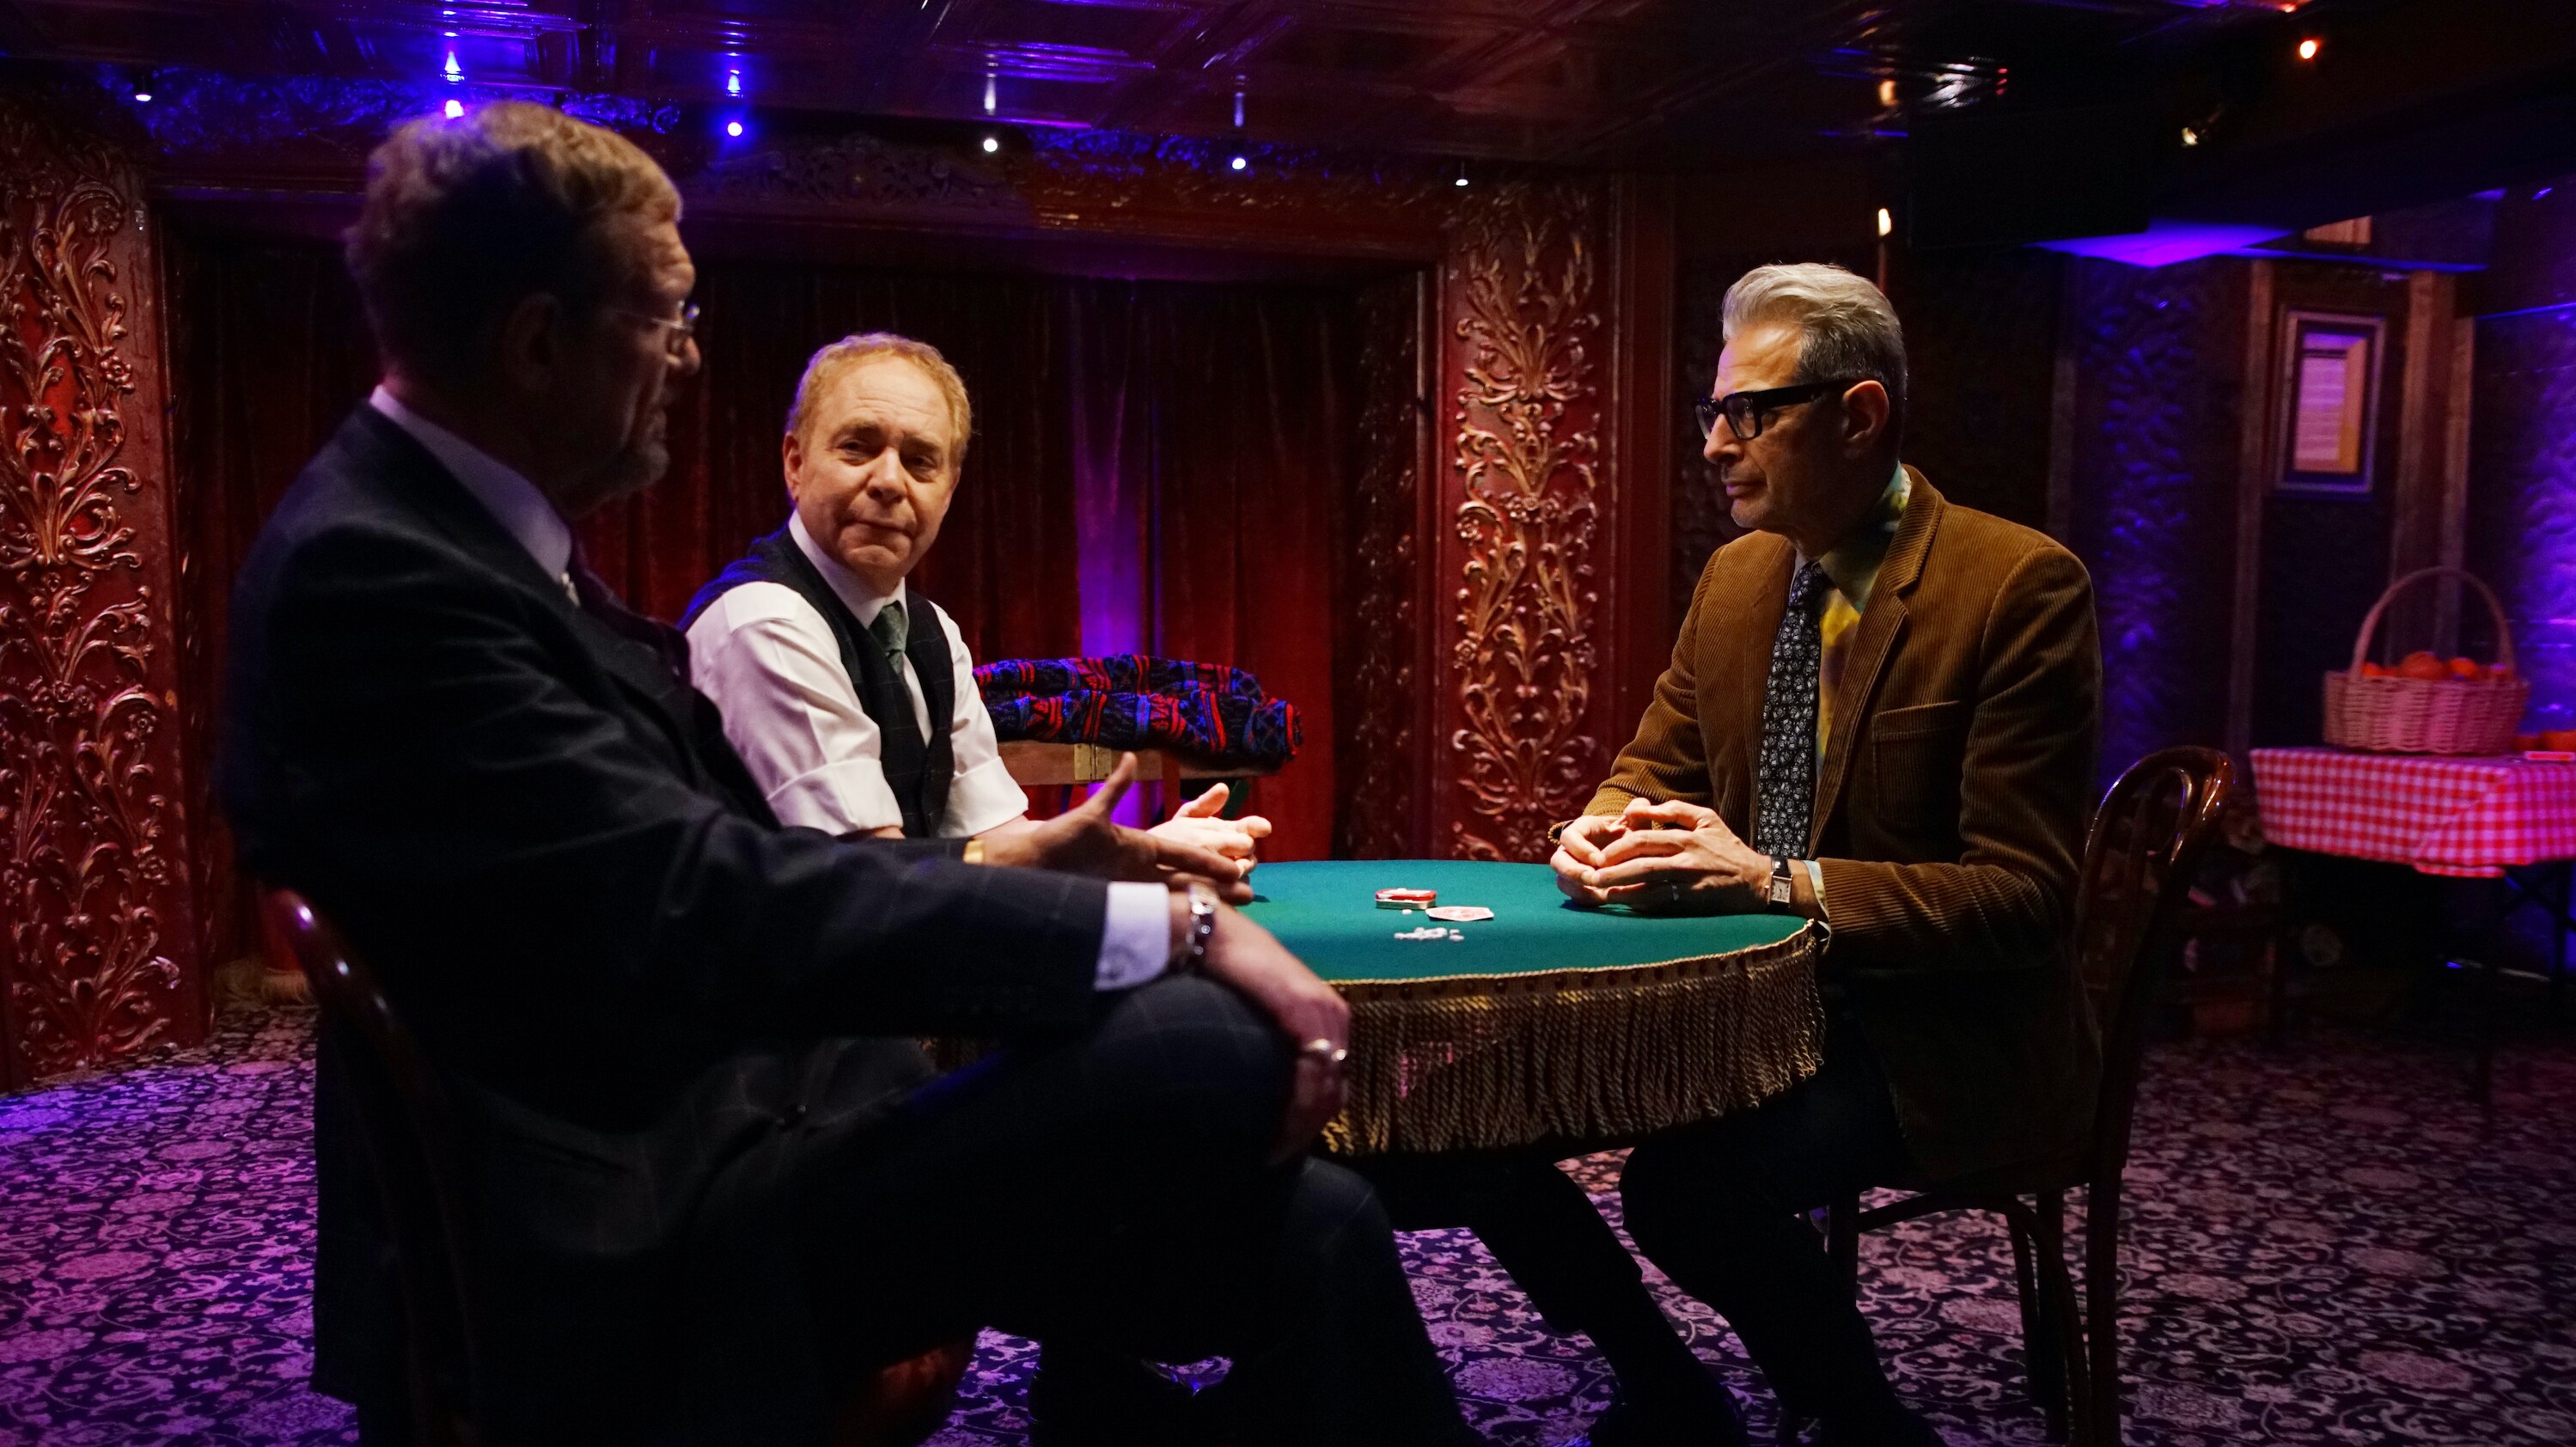 Los Angeles, CA - Jeff Goldblum (R) talks about magic with Penn (L) and Teller (center). (Credit: National Geographic)